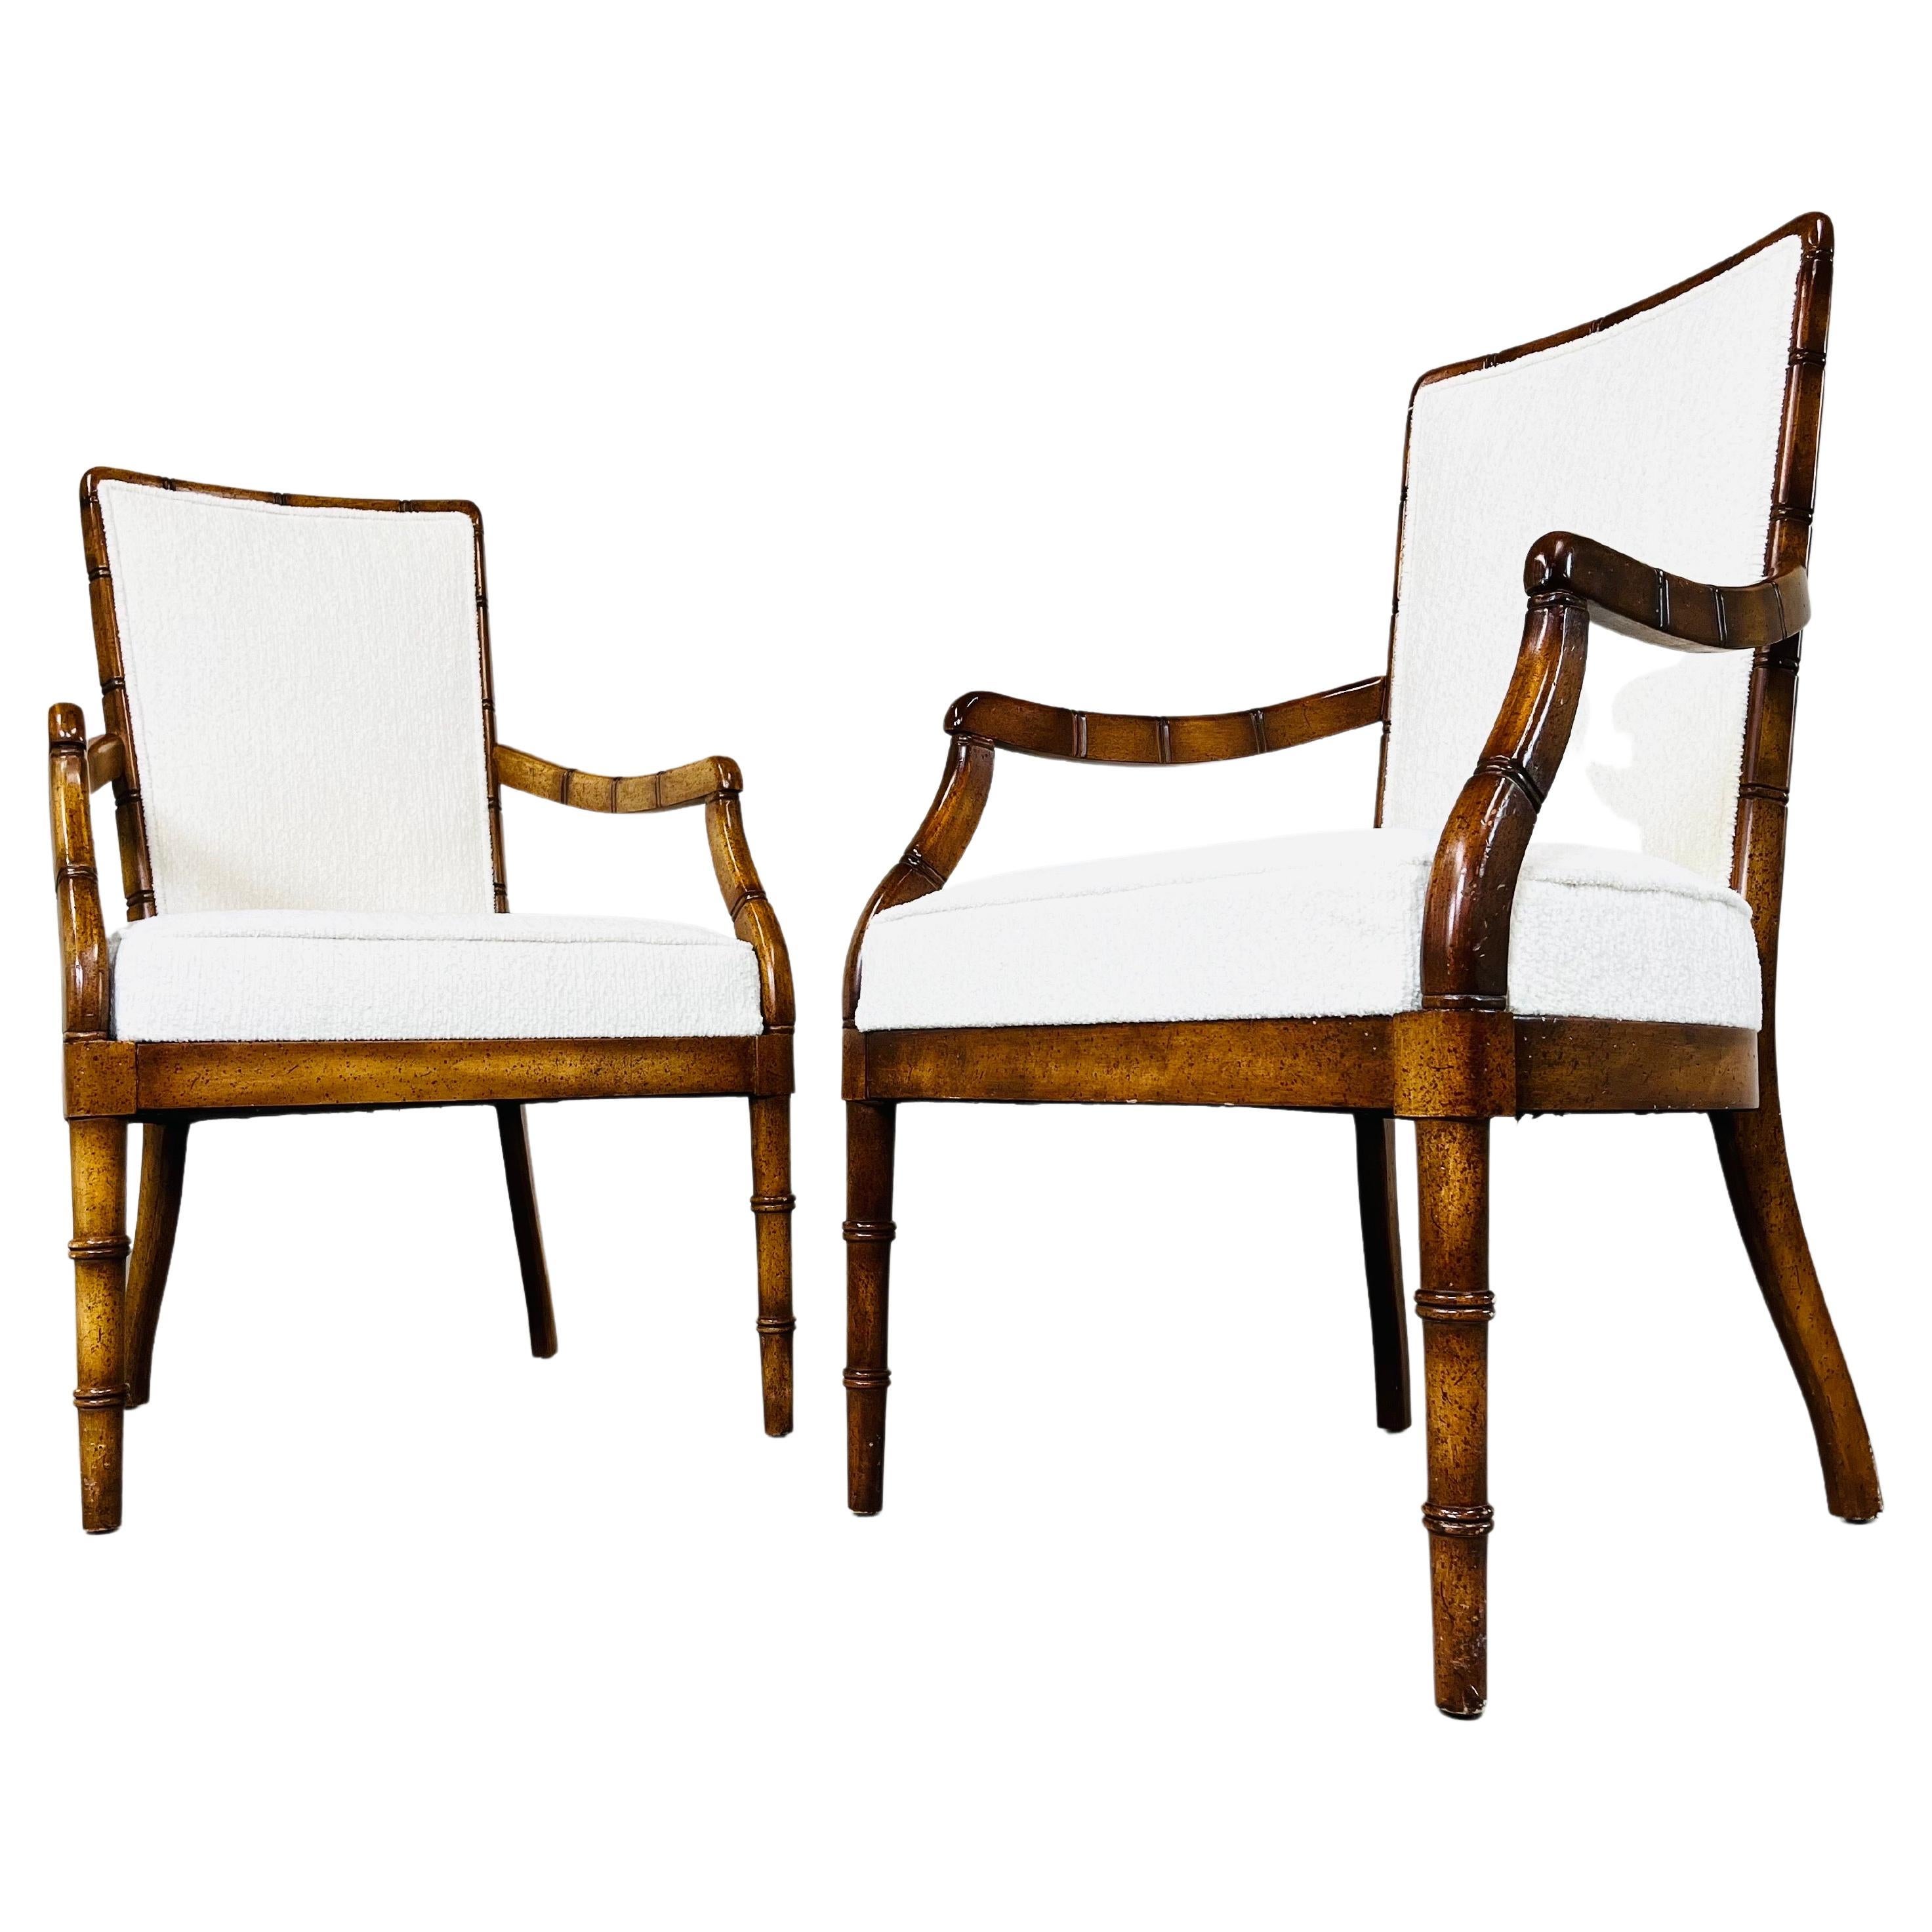 Pair of Vintage Chinese Chippendale Faux Bamboo Armchairs with New Supple Fabric